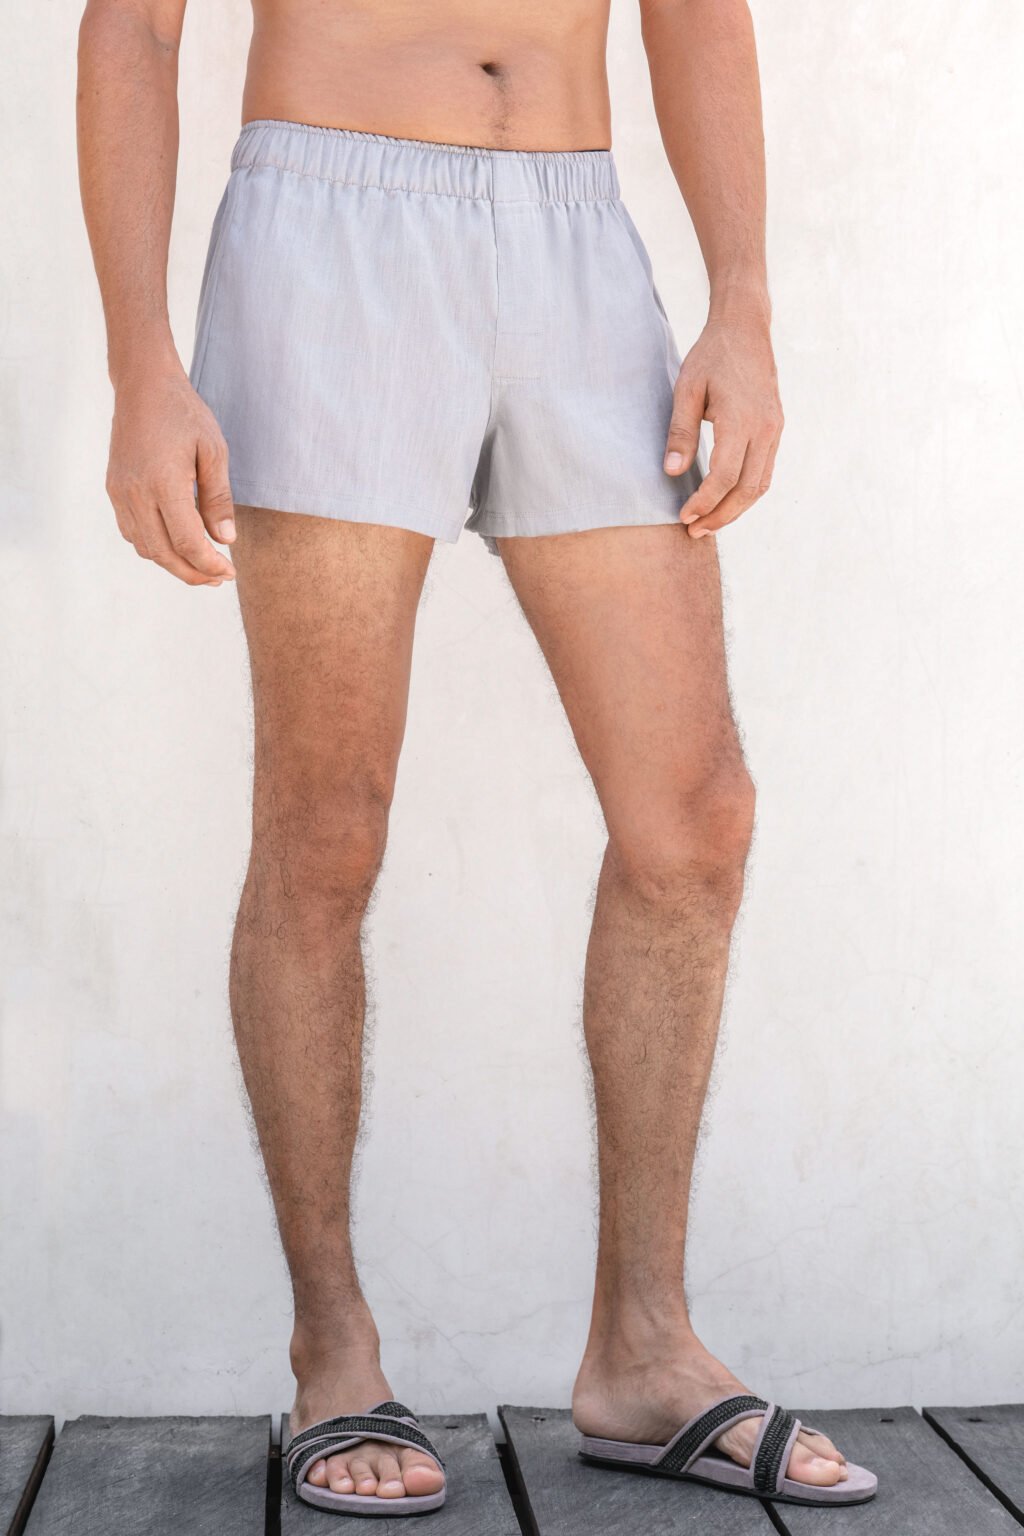 Linen boxer shorts - Above the Clouds Natural Wear